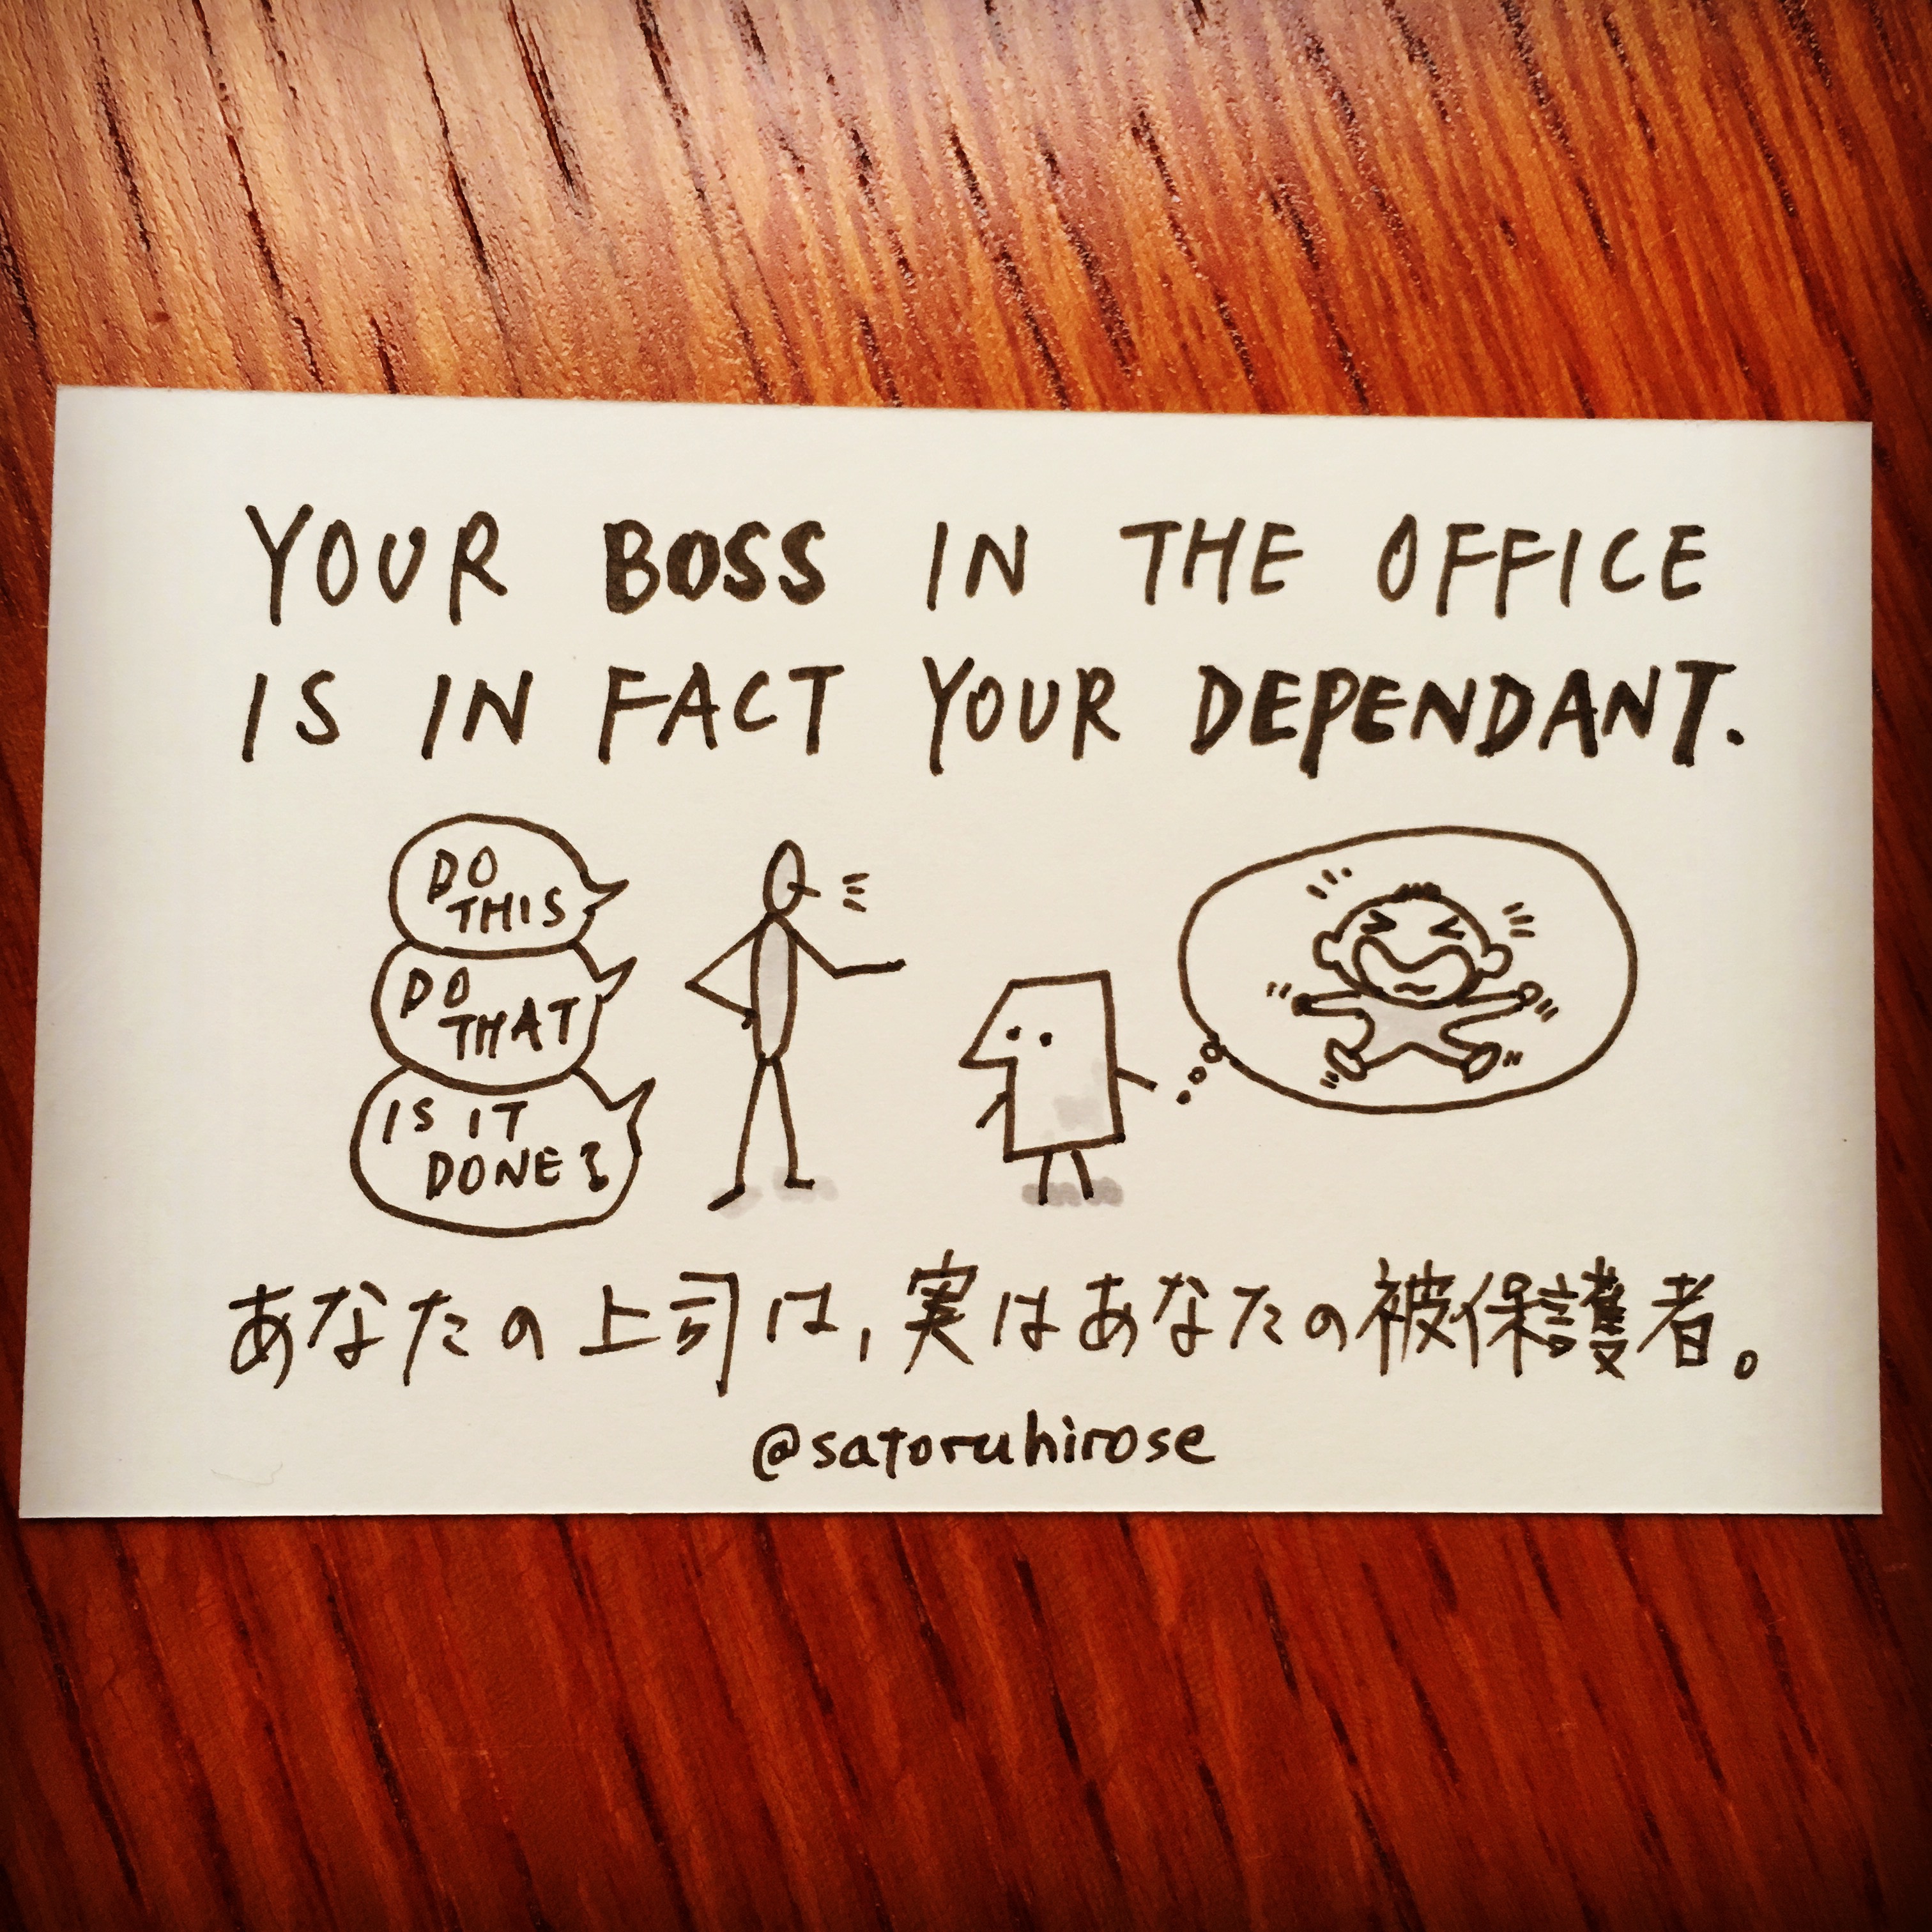 Your boss in the office is in fact your dependent.